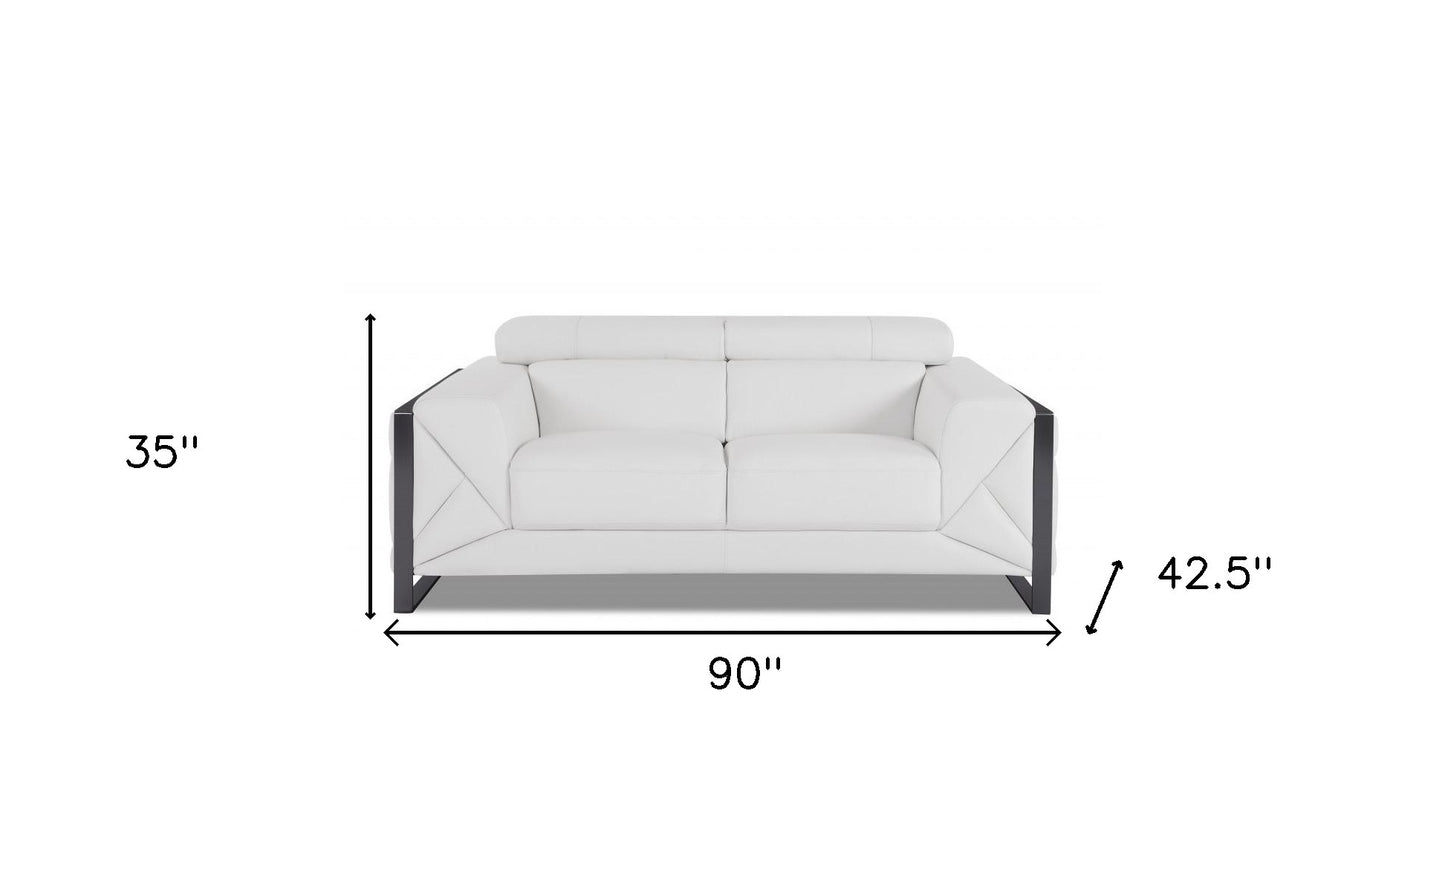 Two Piece Indoor White Italian Leather Five Person Seating Set